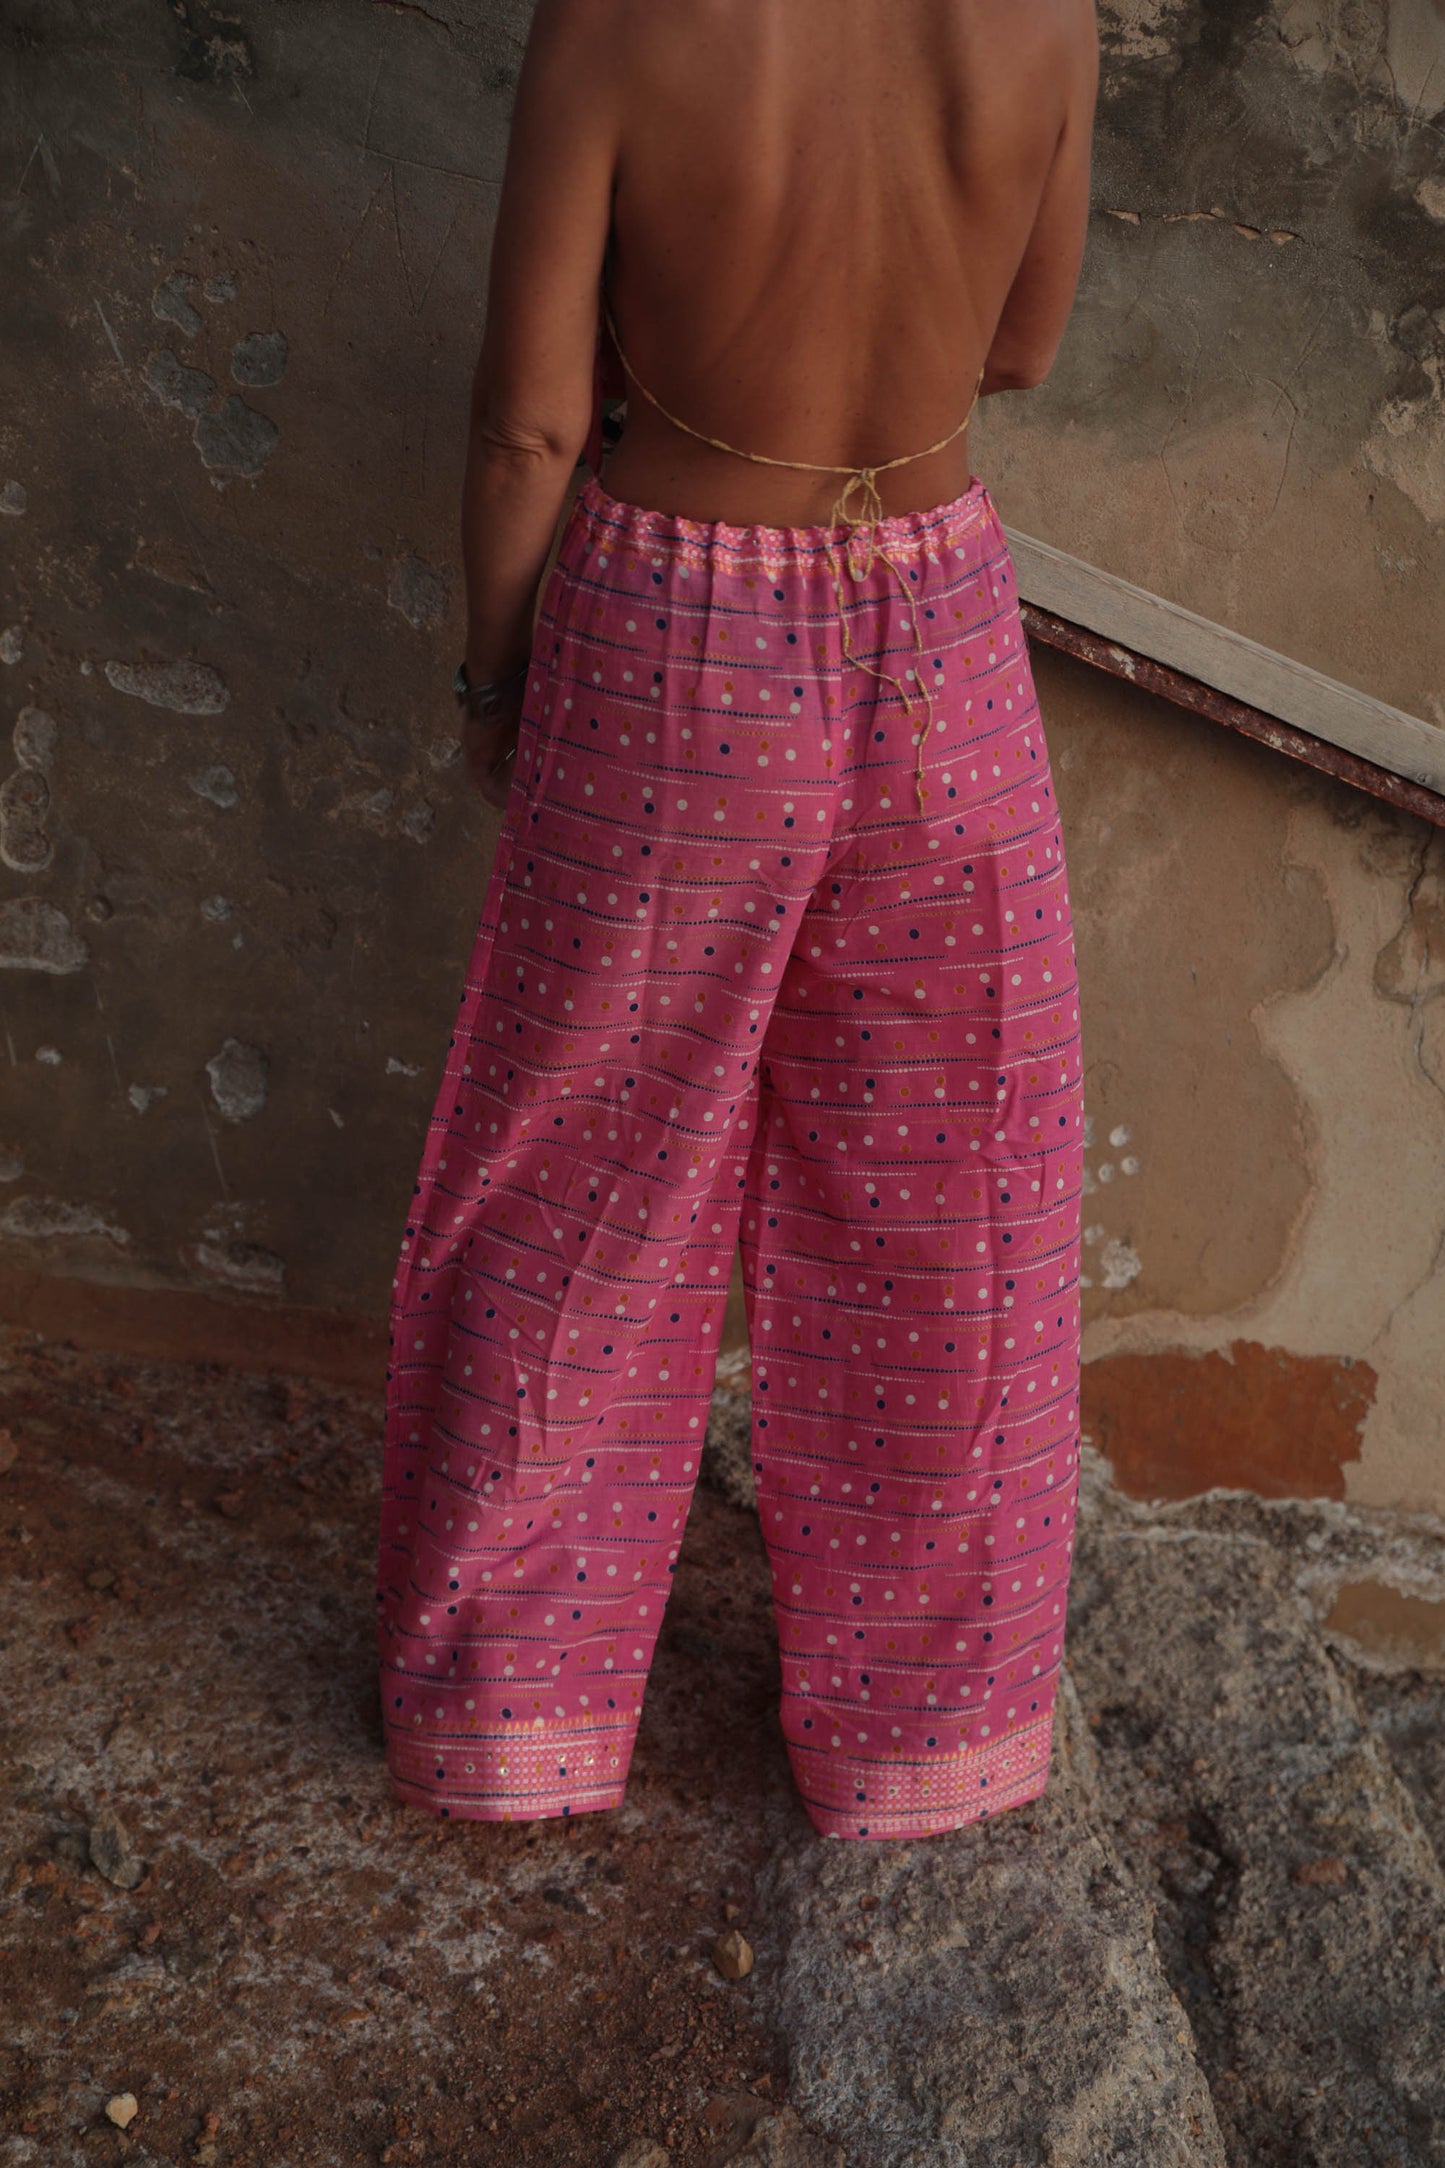 Up-cycled vintage cotton 2 piece set tie top and pants in super thin lightweight pink printed cotton perfect for beach days and vibes around Ibiza town.